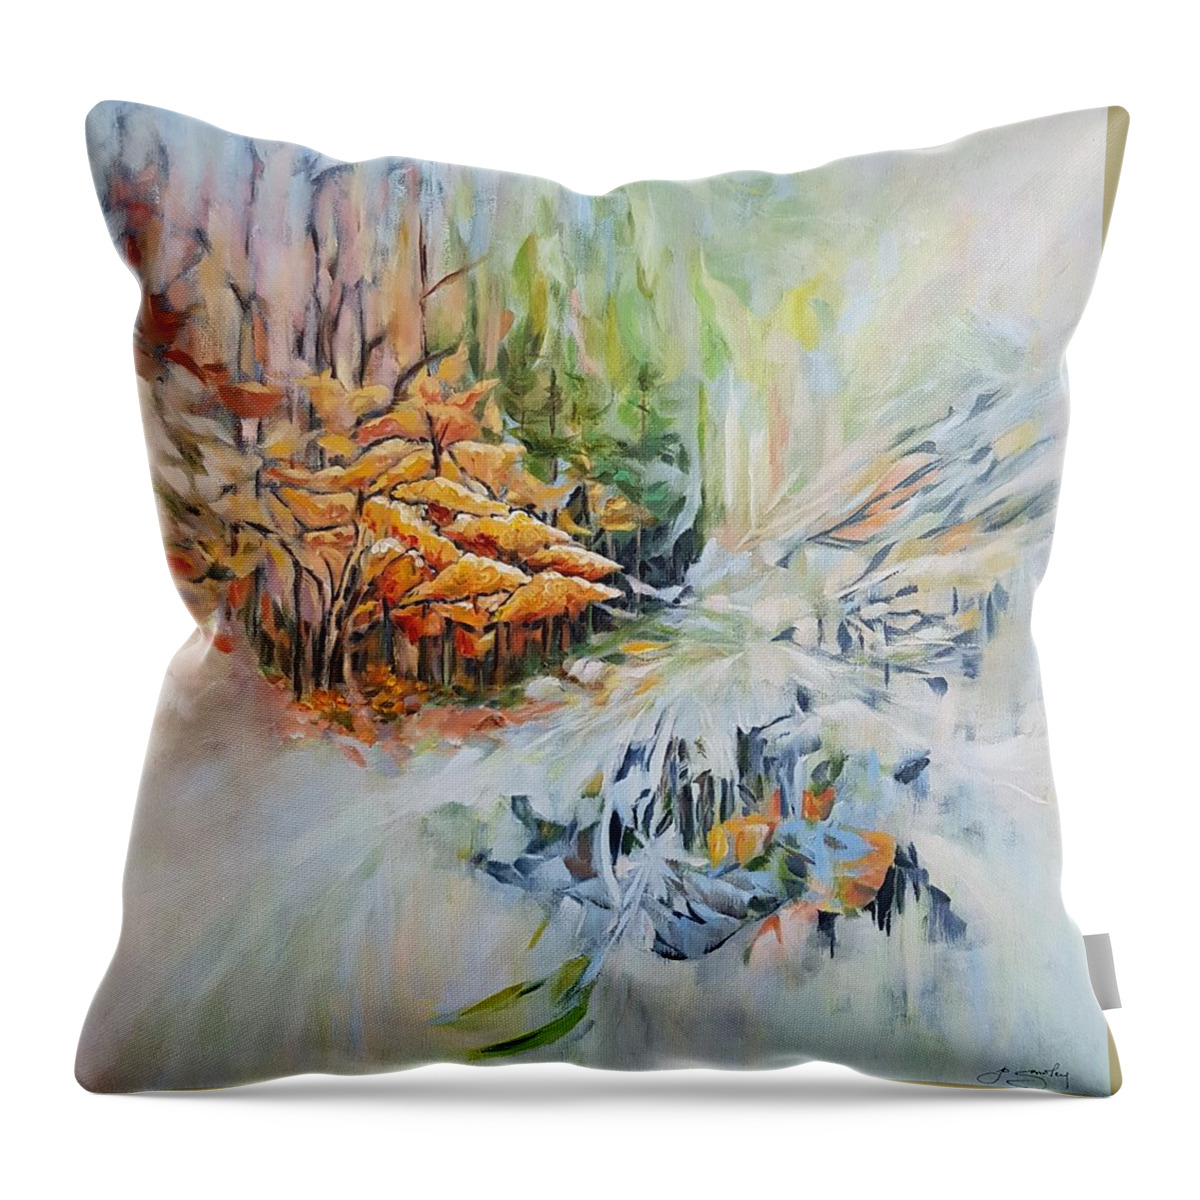 Abstract Throw Pillow featuring the painting Dreamland by Jo Smoley